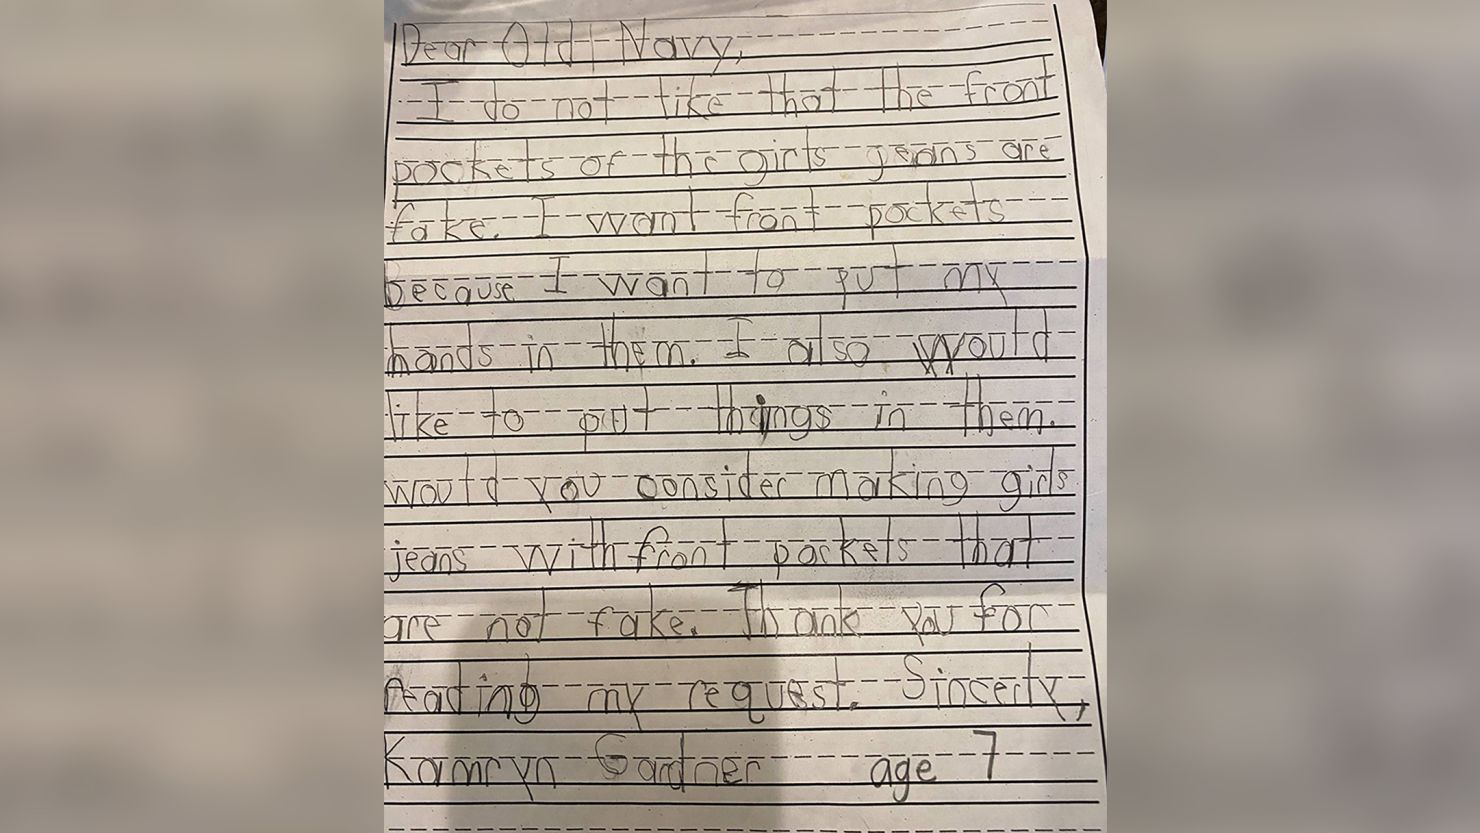 First-grader Kamryn Gardner wrote to Old Navy that she wanted jeans with real pockets to "put my hands in them" and "put things in them."